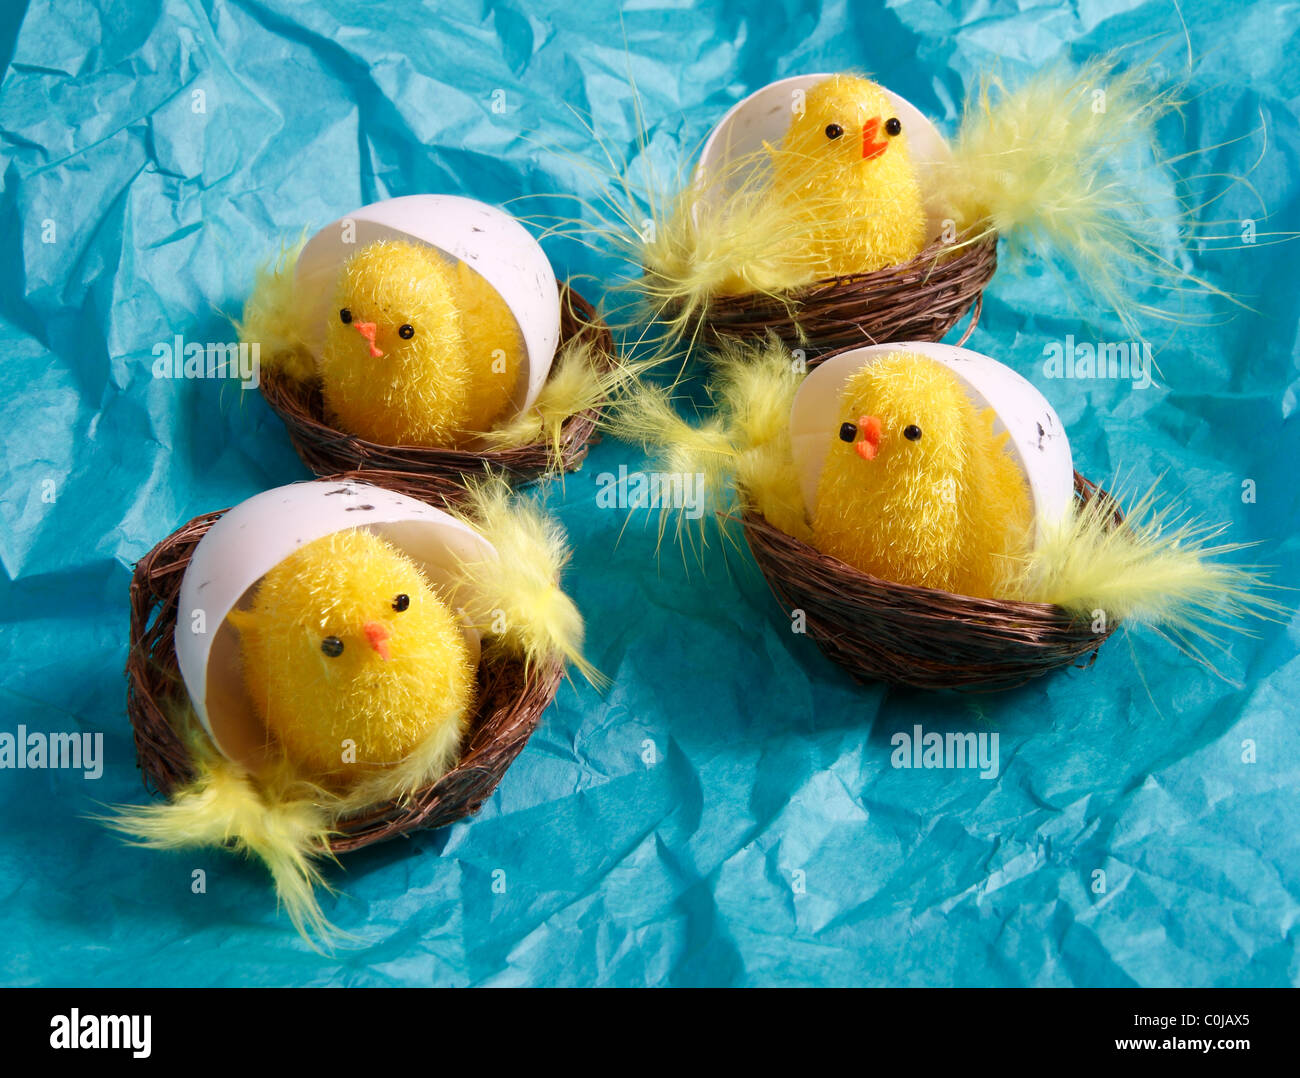 Four cute Easter Chicks in their Egg Shells Stock Photo